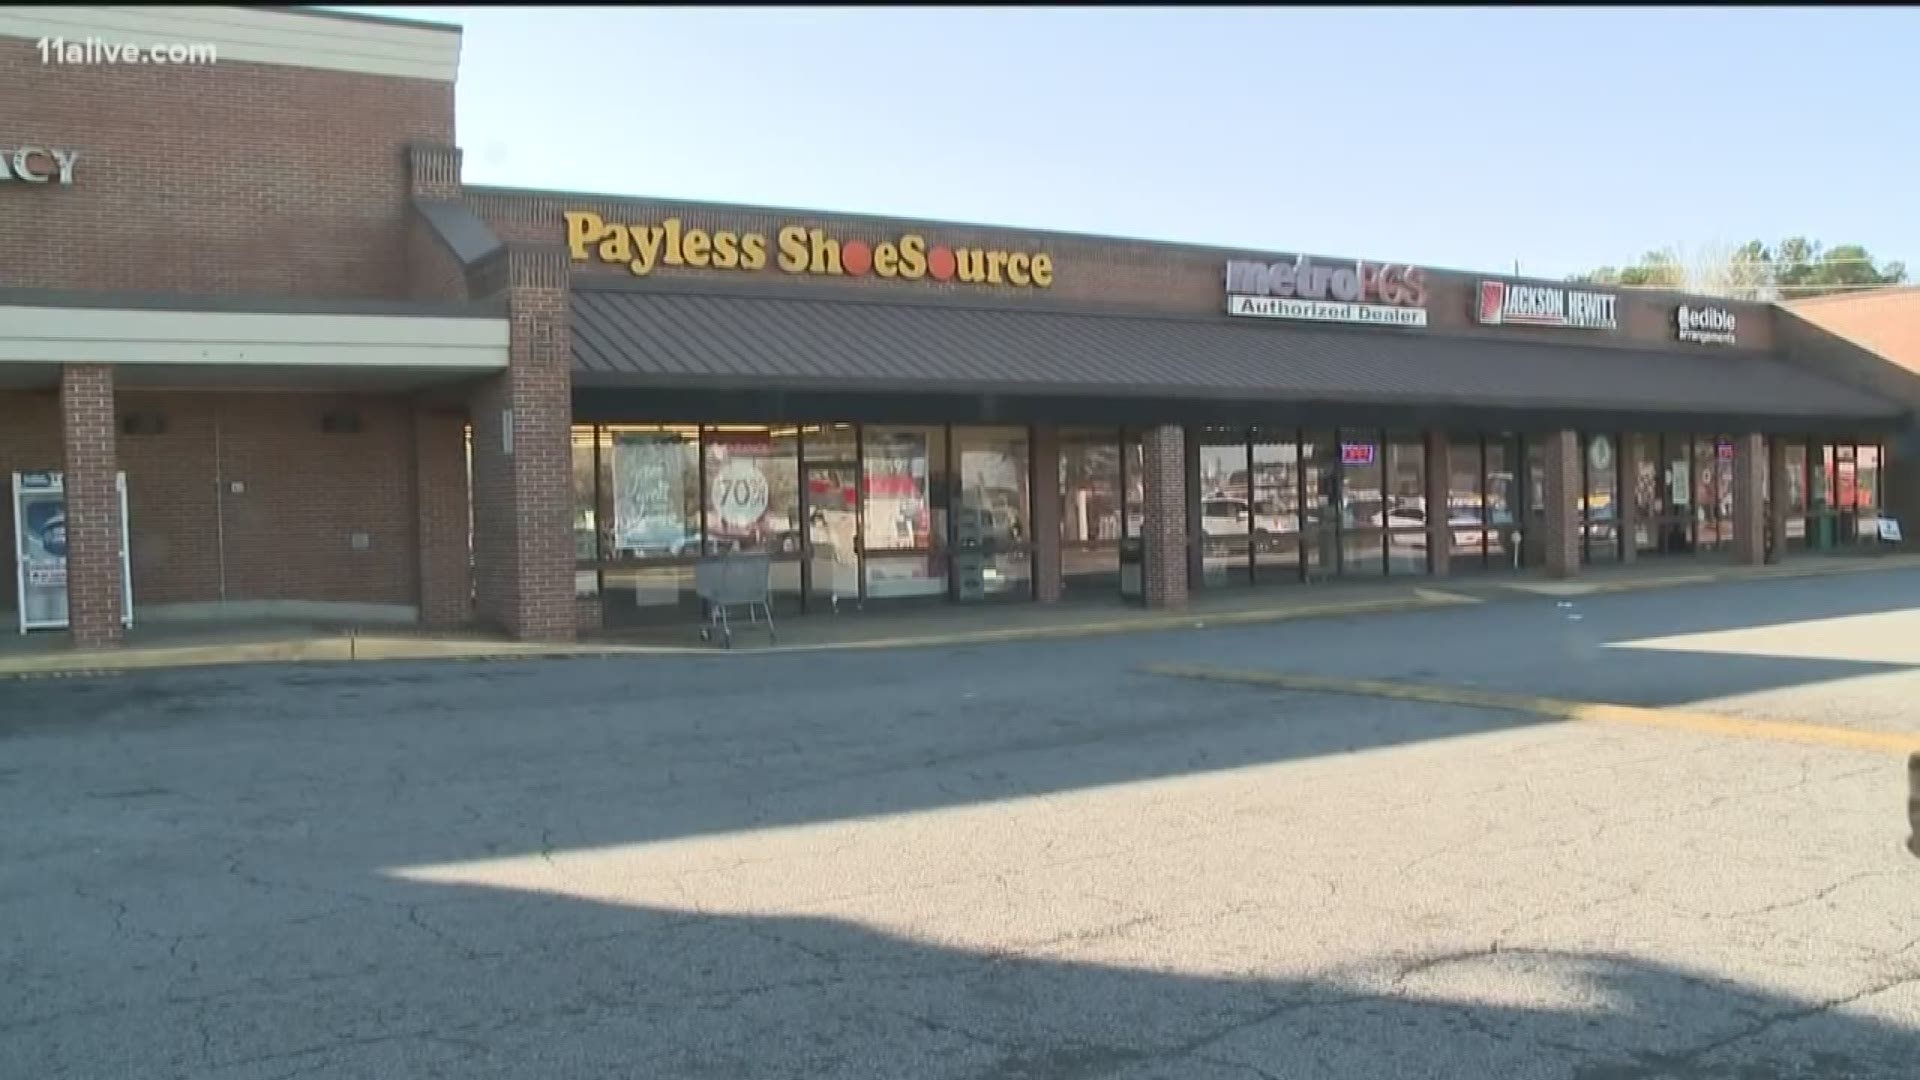 A lawyer for the girl's family said they were "disturbed" to learn that Payless would seek to destroy "crucial evidence of their gross recklessness."